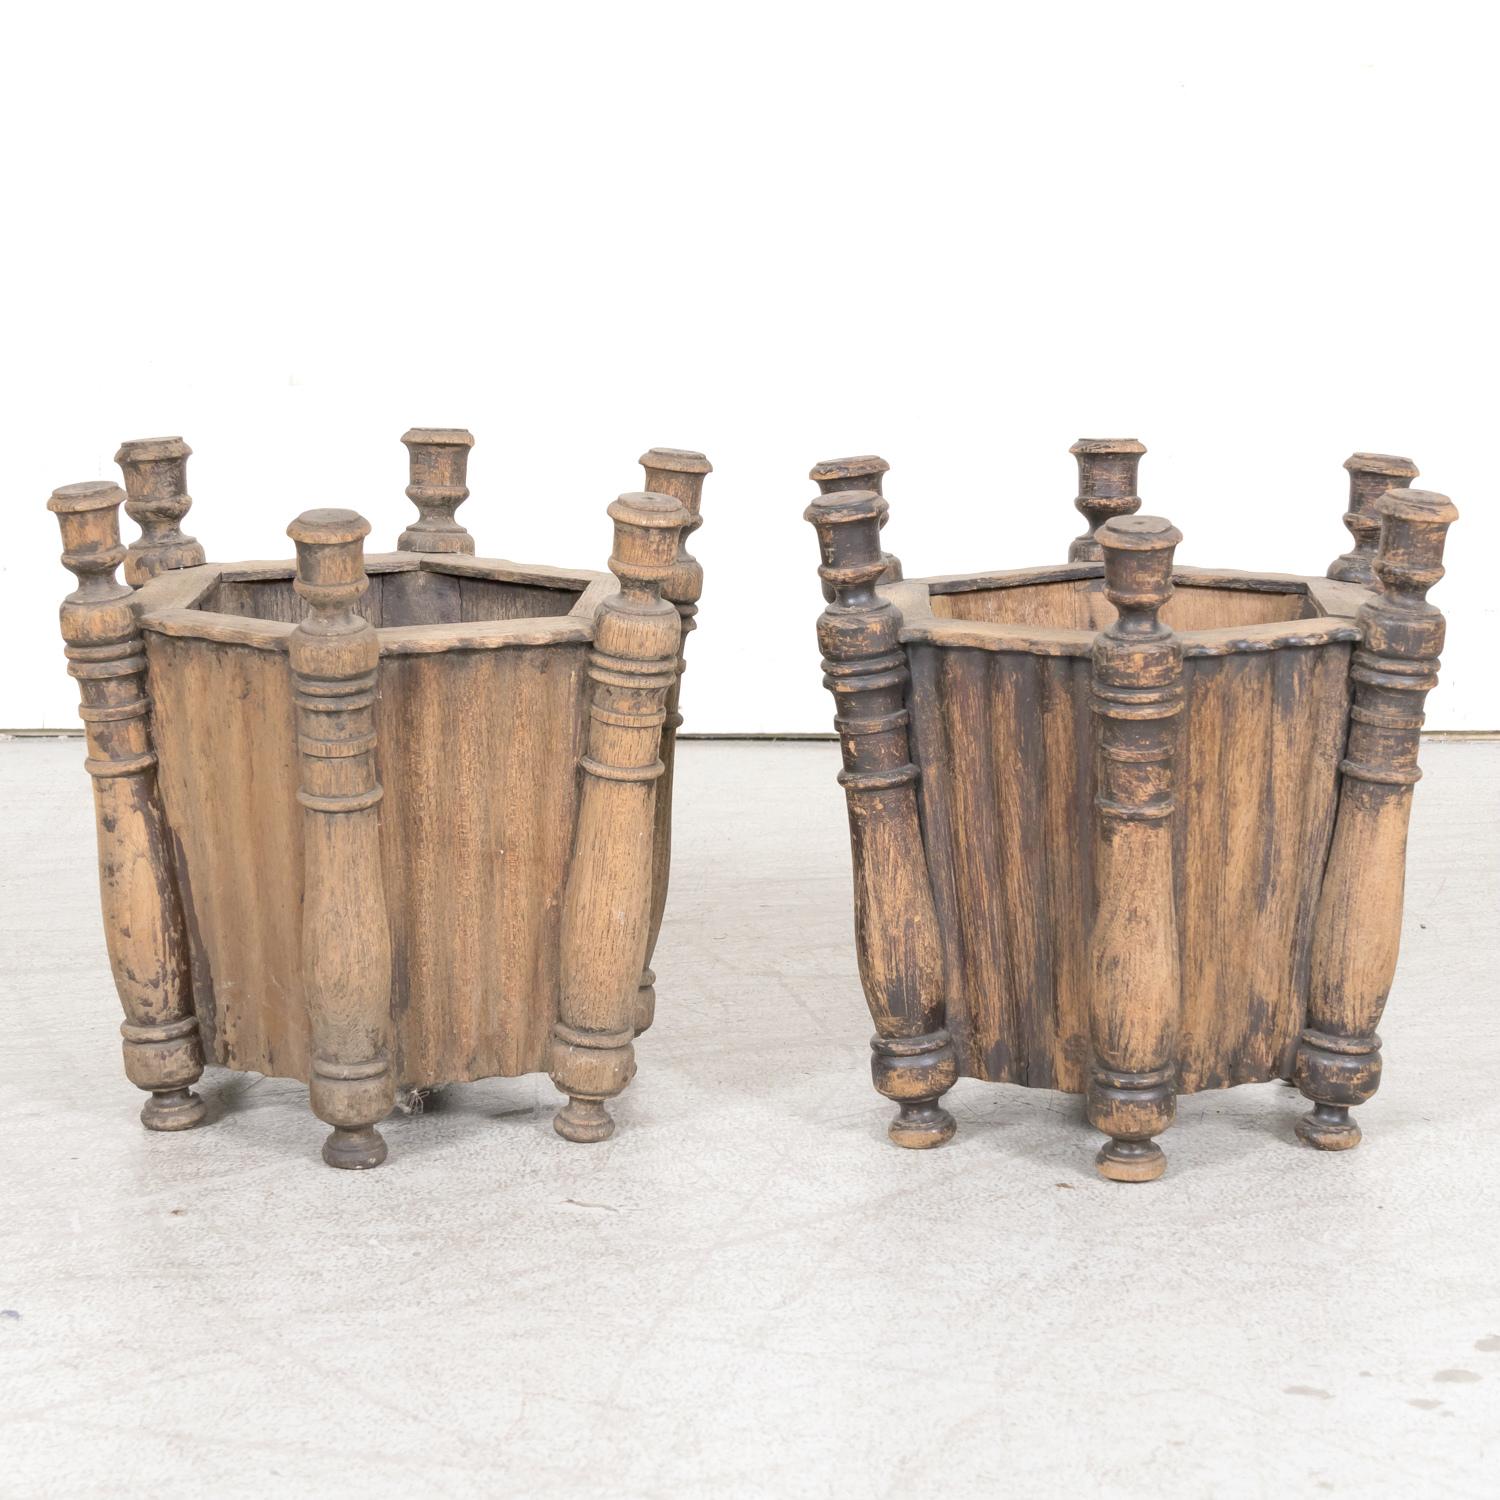 A handsome pair of antique French carved oak hexagonal planters or jardinieres, circa 1900s. Having a beautiful sun bleached patina from years in the scorching Mediterranean sun, they will add character and charm to any garden, patio, or indoor